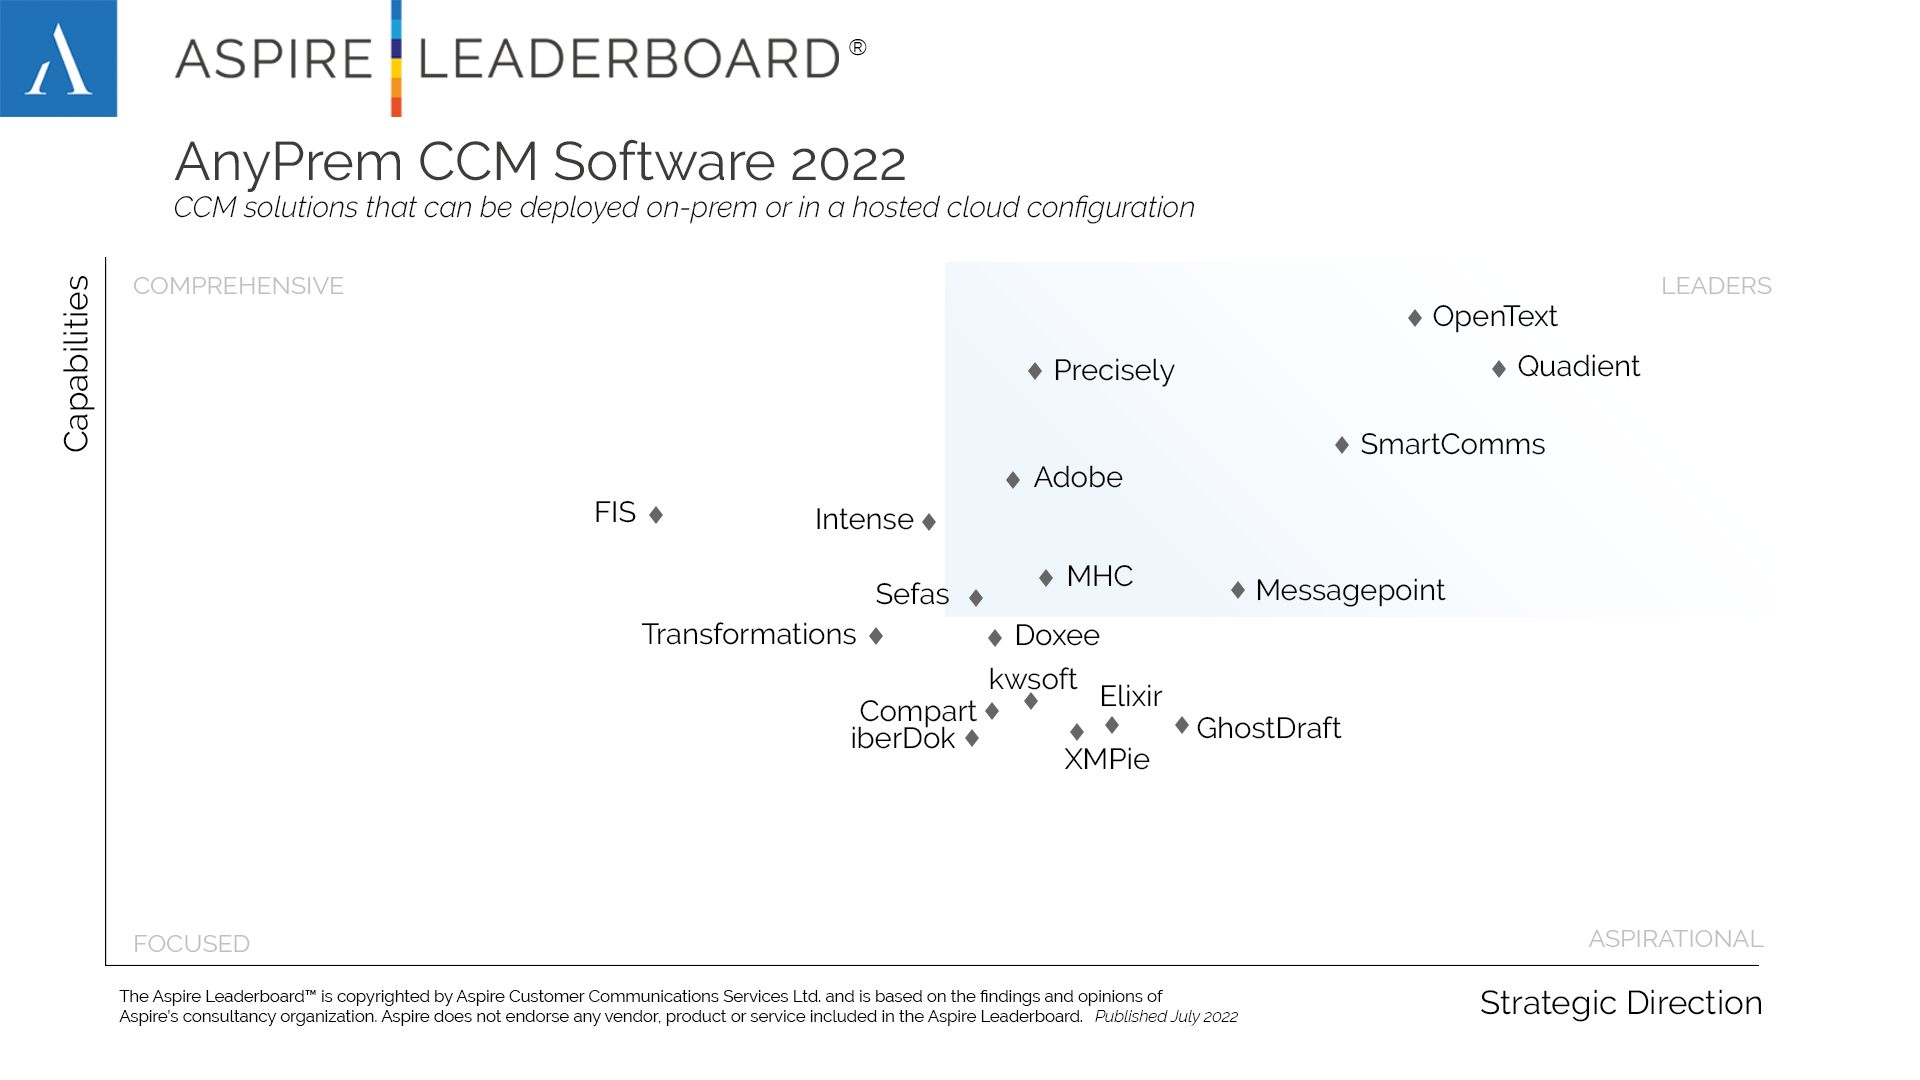 The Aspire Leaderboard graphic displays the AnyPrem CCM Software grid for 2022, showing OpenText in the upper right quadrant. 